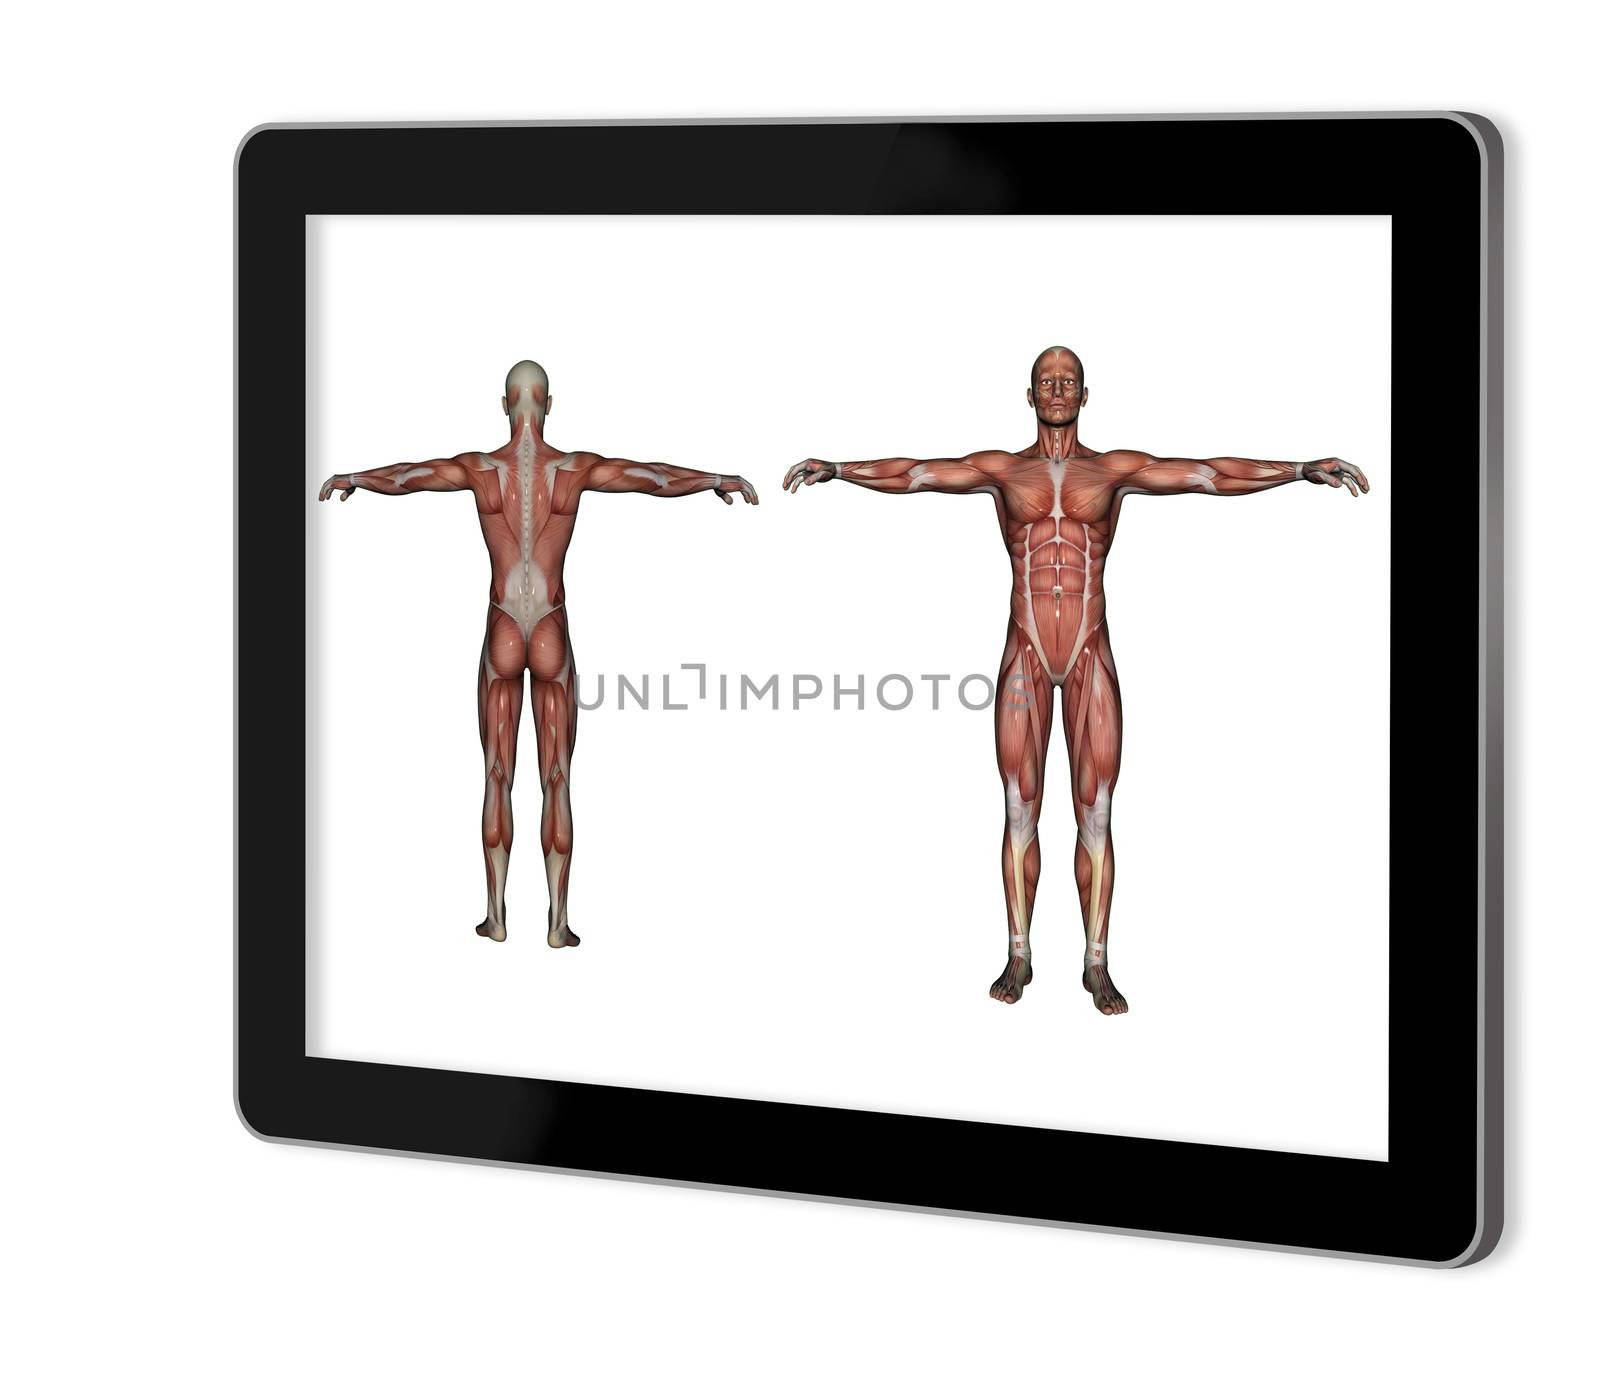 Human Anatomy - Male Muscles  show  on tablet  made in 2d software isolated on white